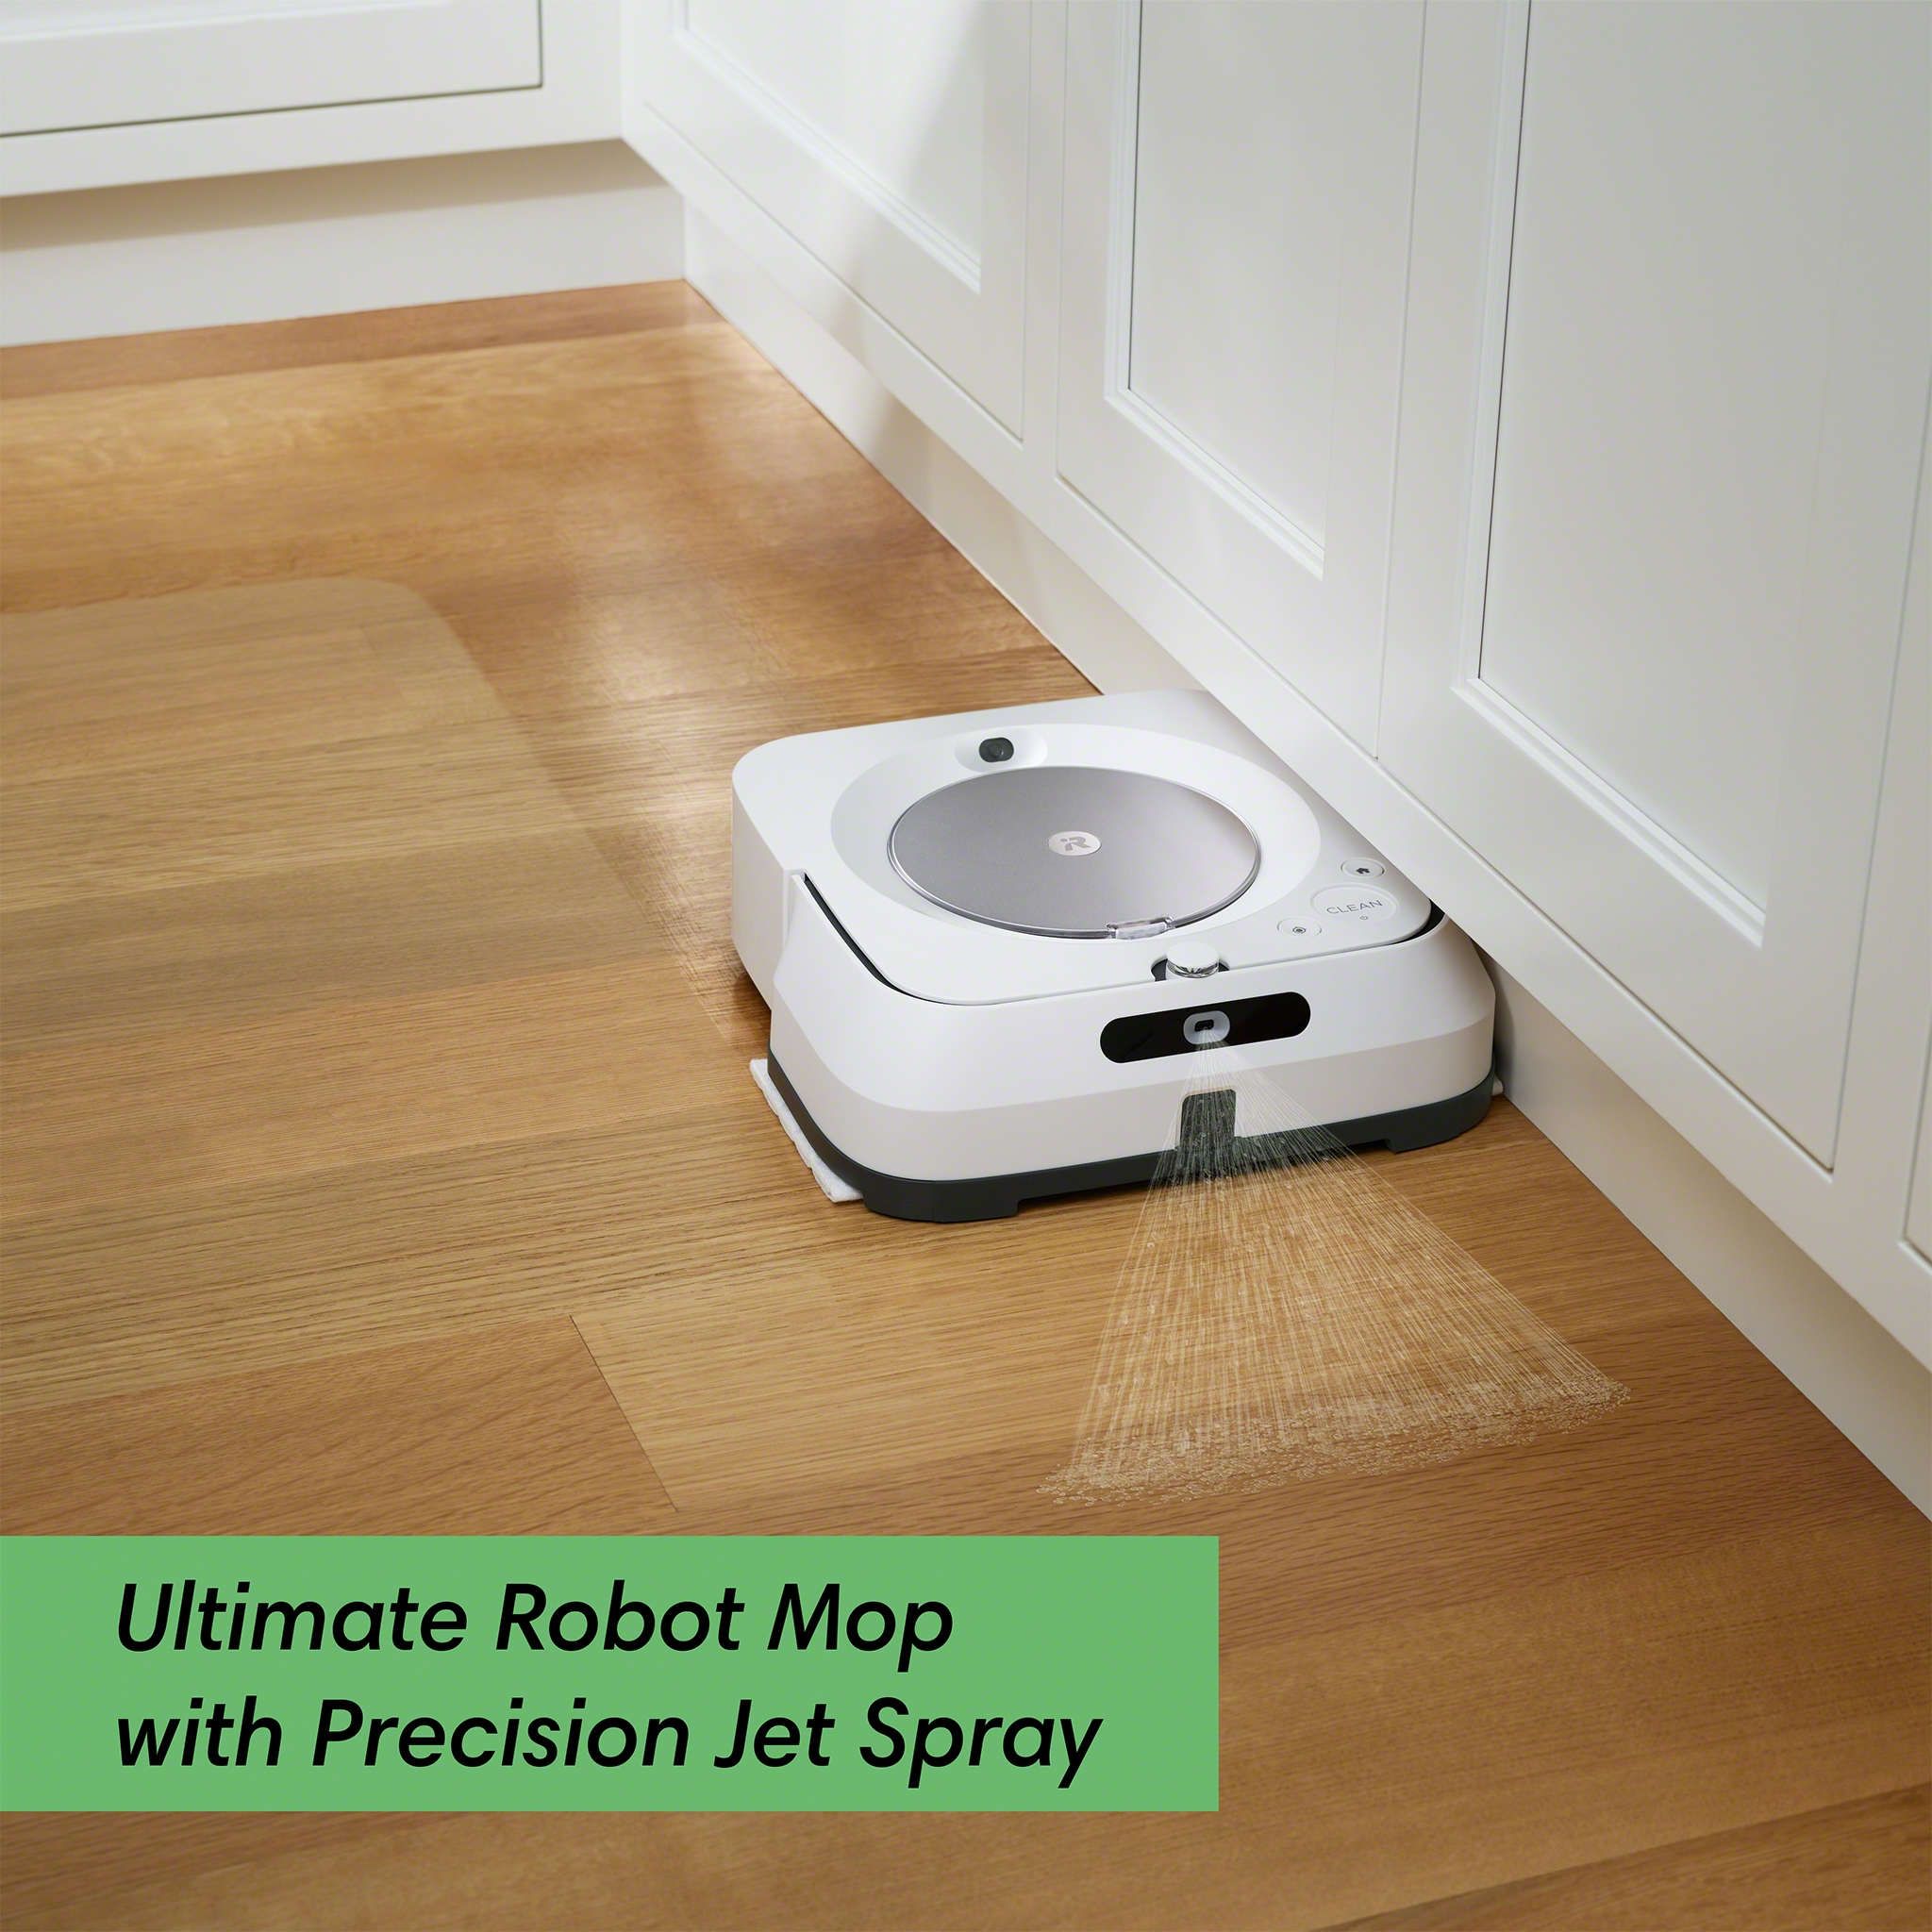 iRobot Braava Jet M6 (6110) Ultimate Robot Mop- Wi-Fi Connected, Precision Jet Spray, Smart Mapping, Works with Google Home, Ideal for Multiple Rooms, Recharges and Resumes - image 4 of 23